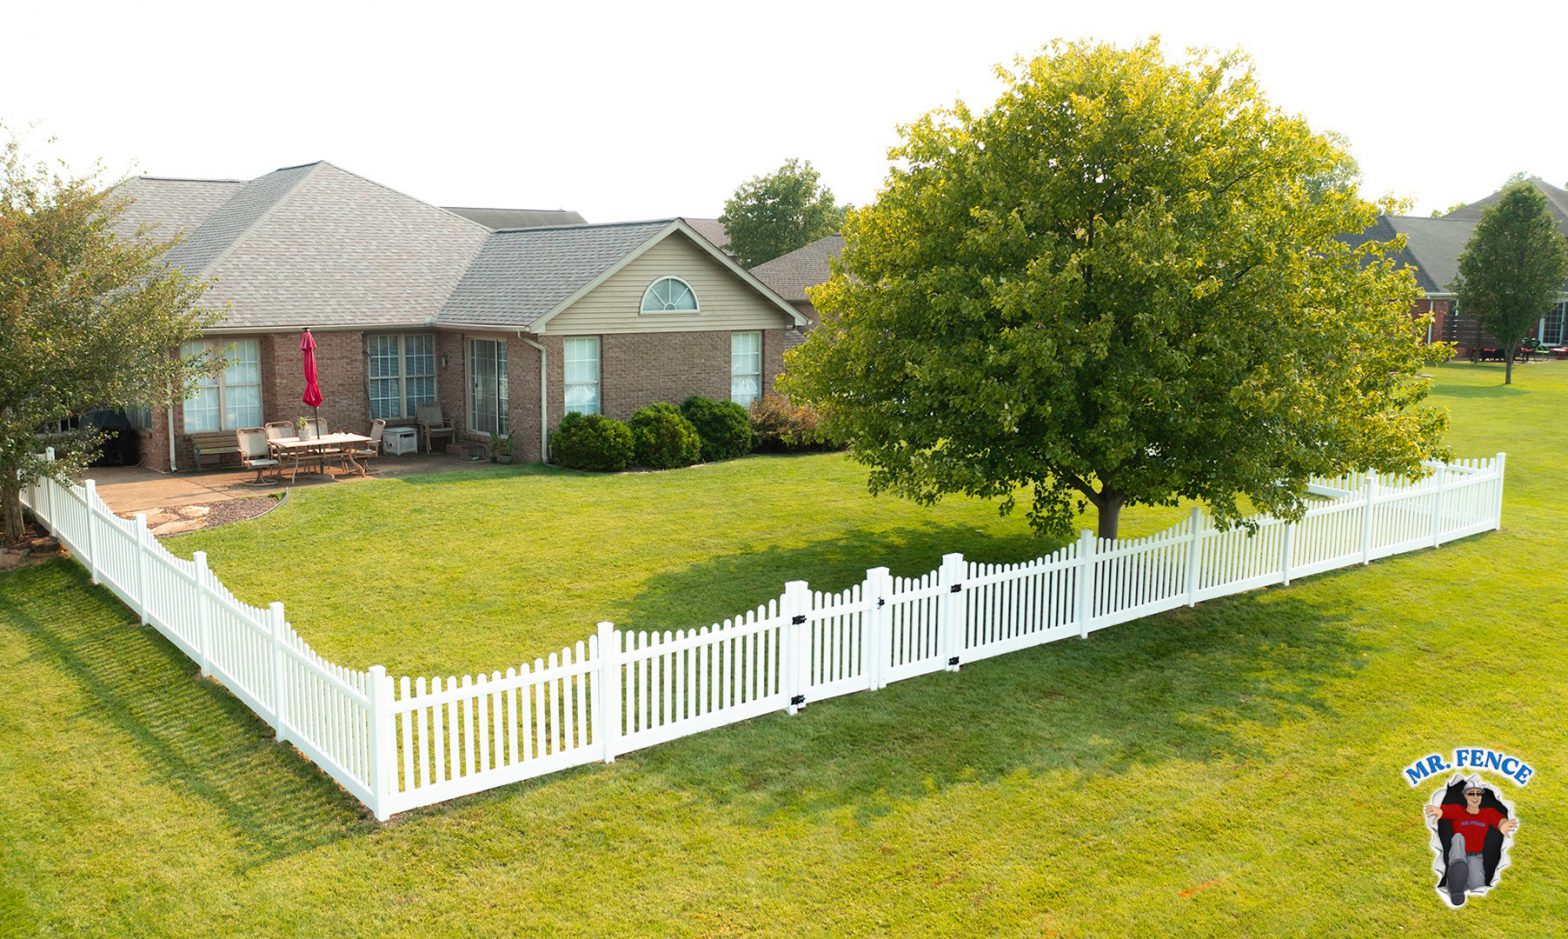 Photo of a vinyl fence in a residential area